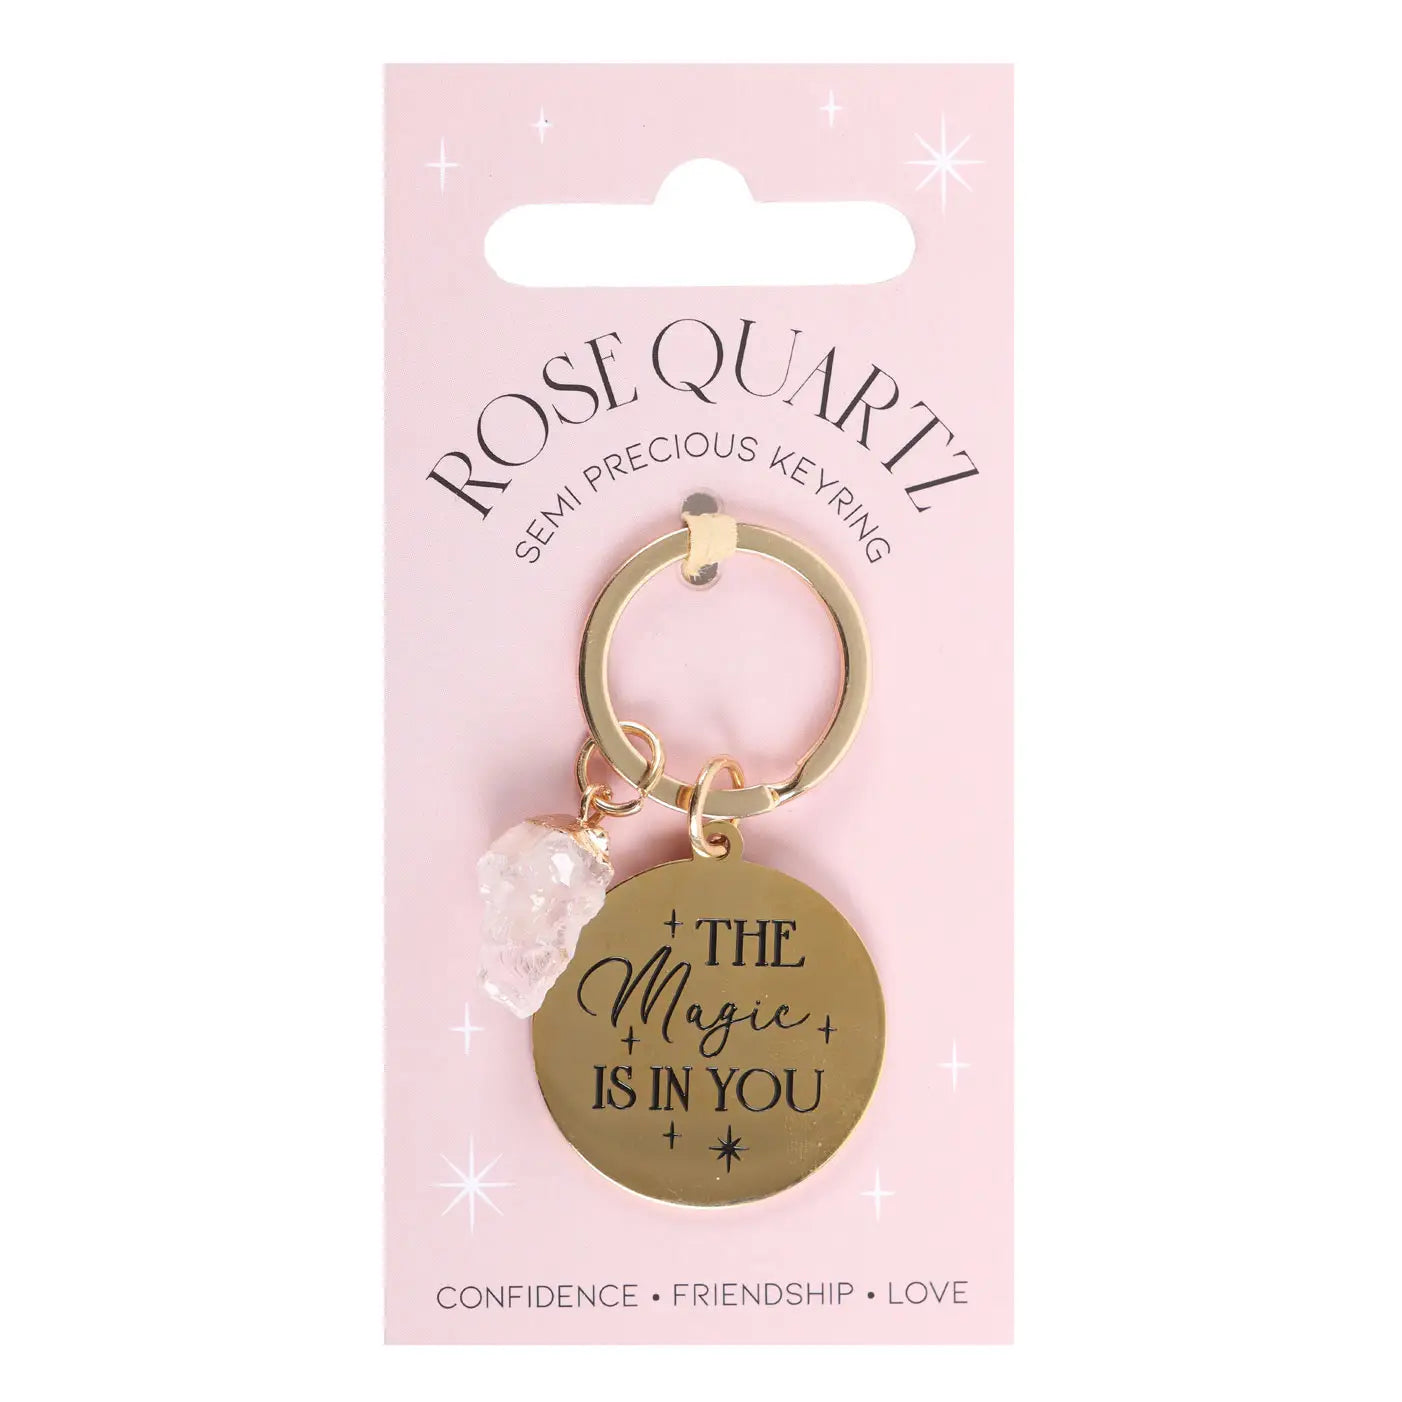 The Magic is in You Key Ring